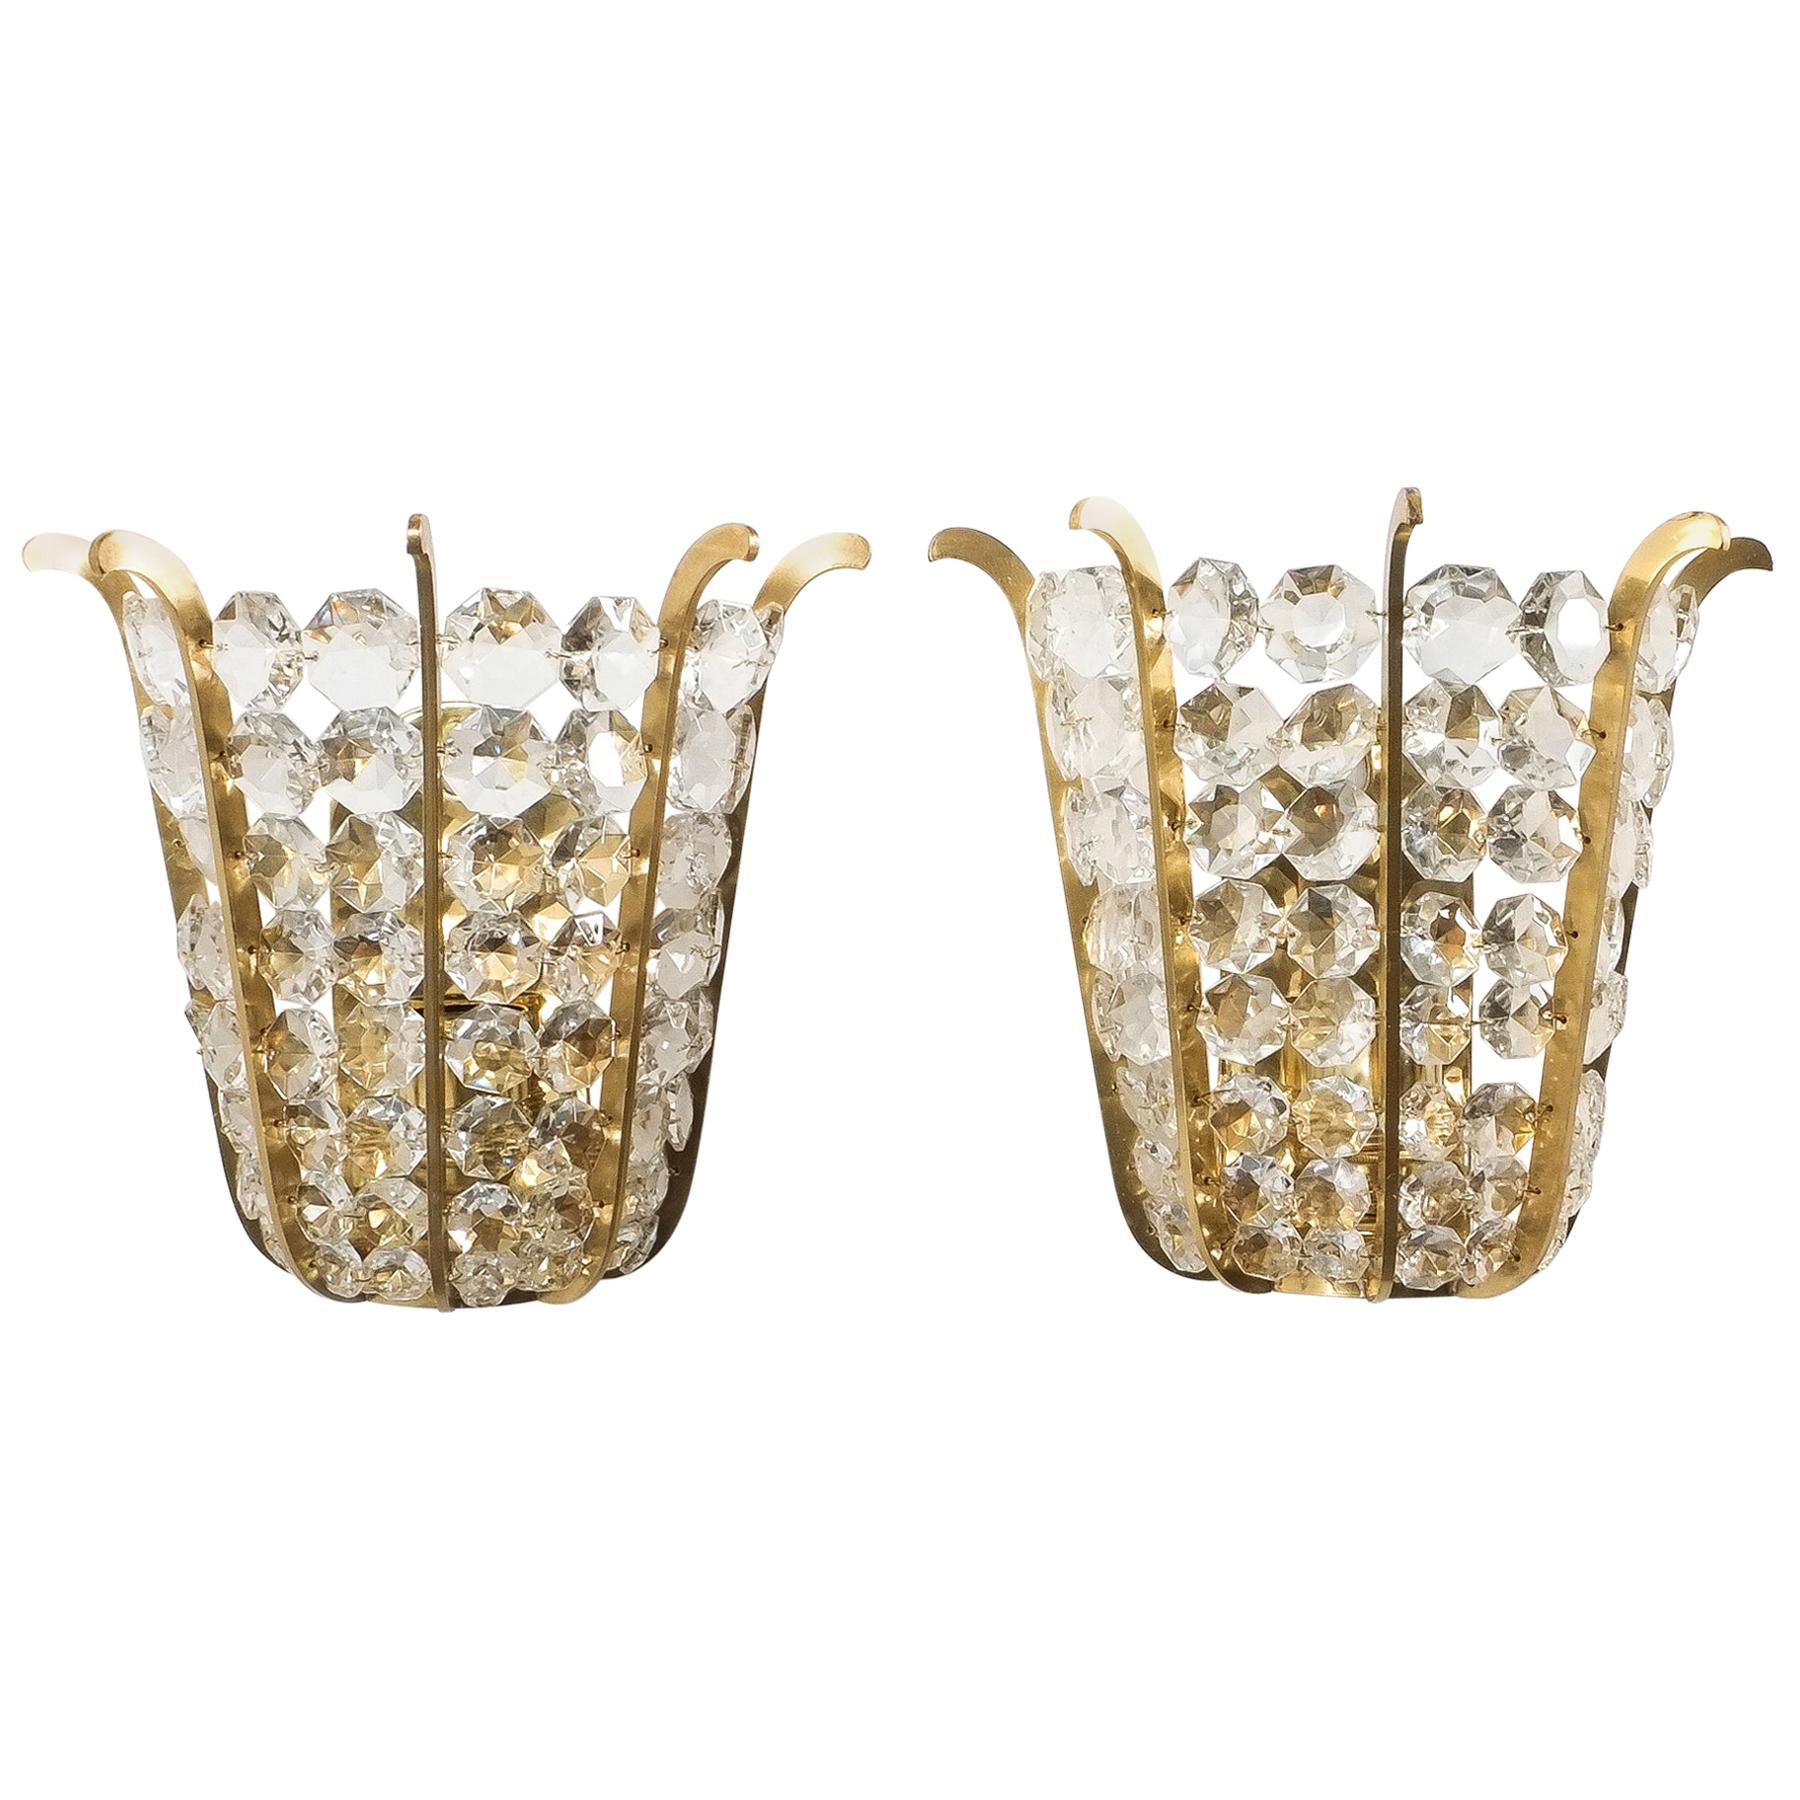 Multiple Bakalowits Crown Sconces (4) Brass and Glass, Austria 1950